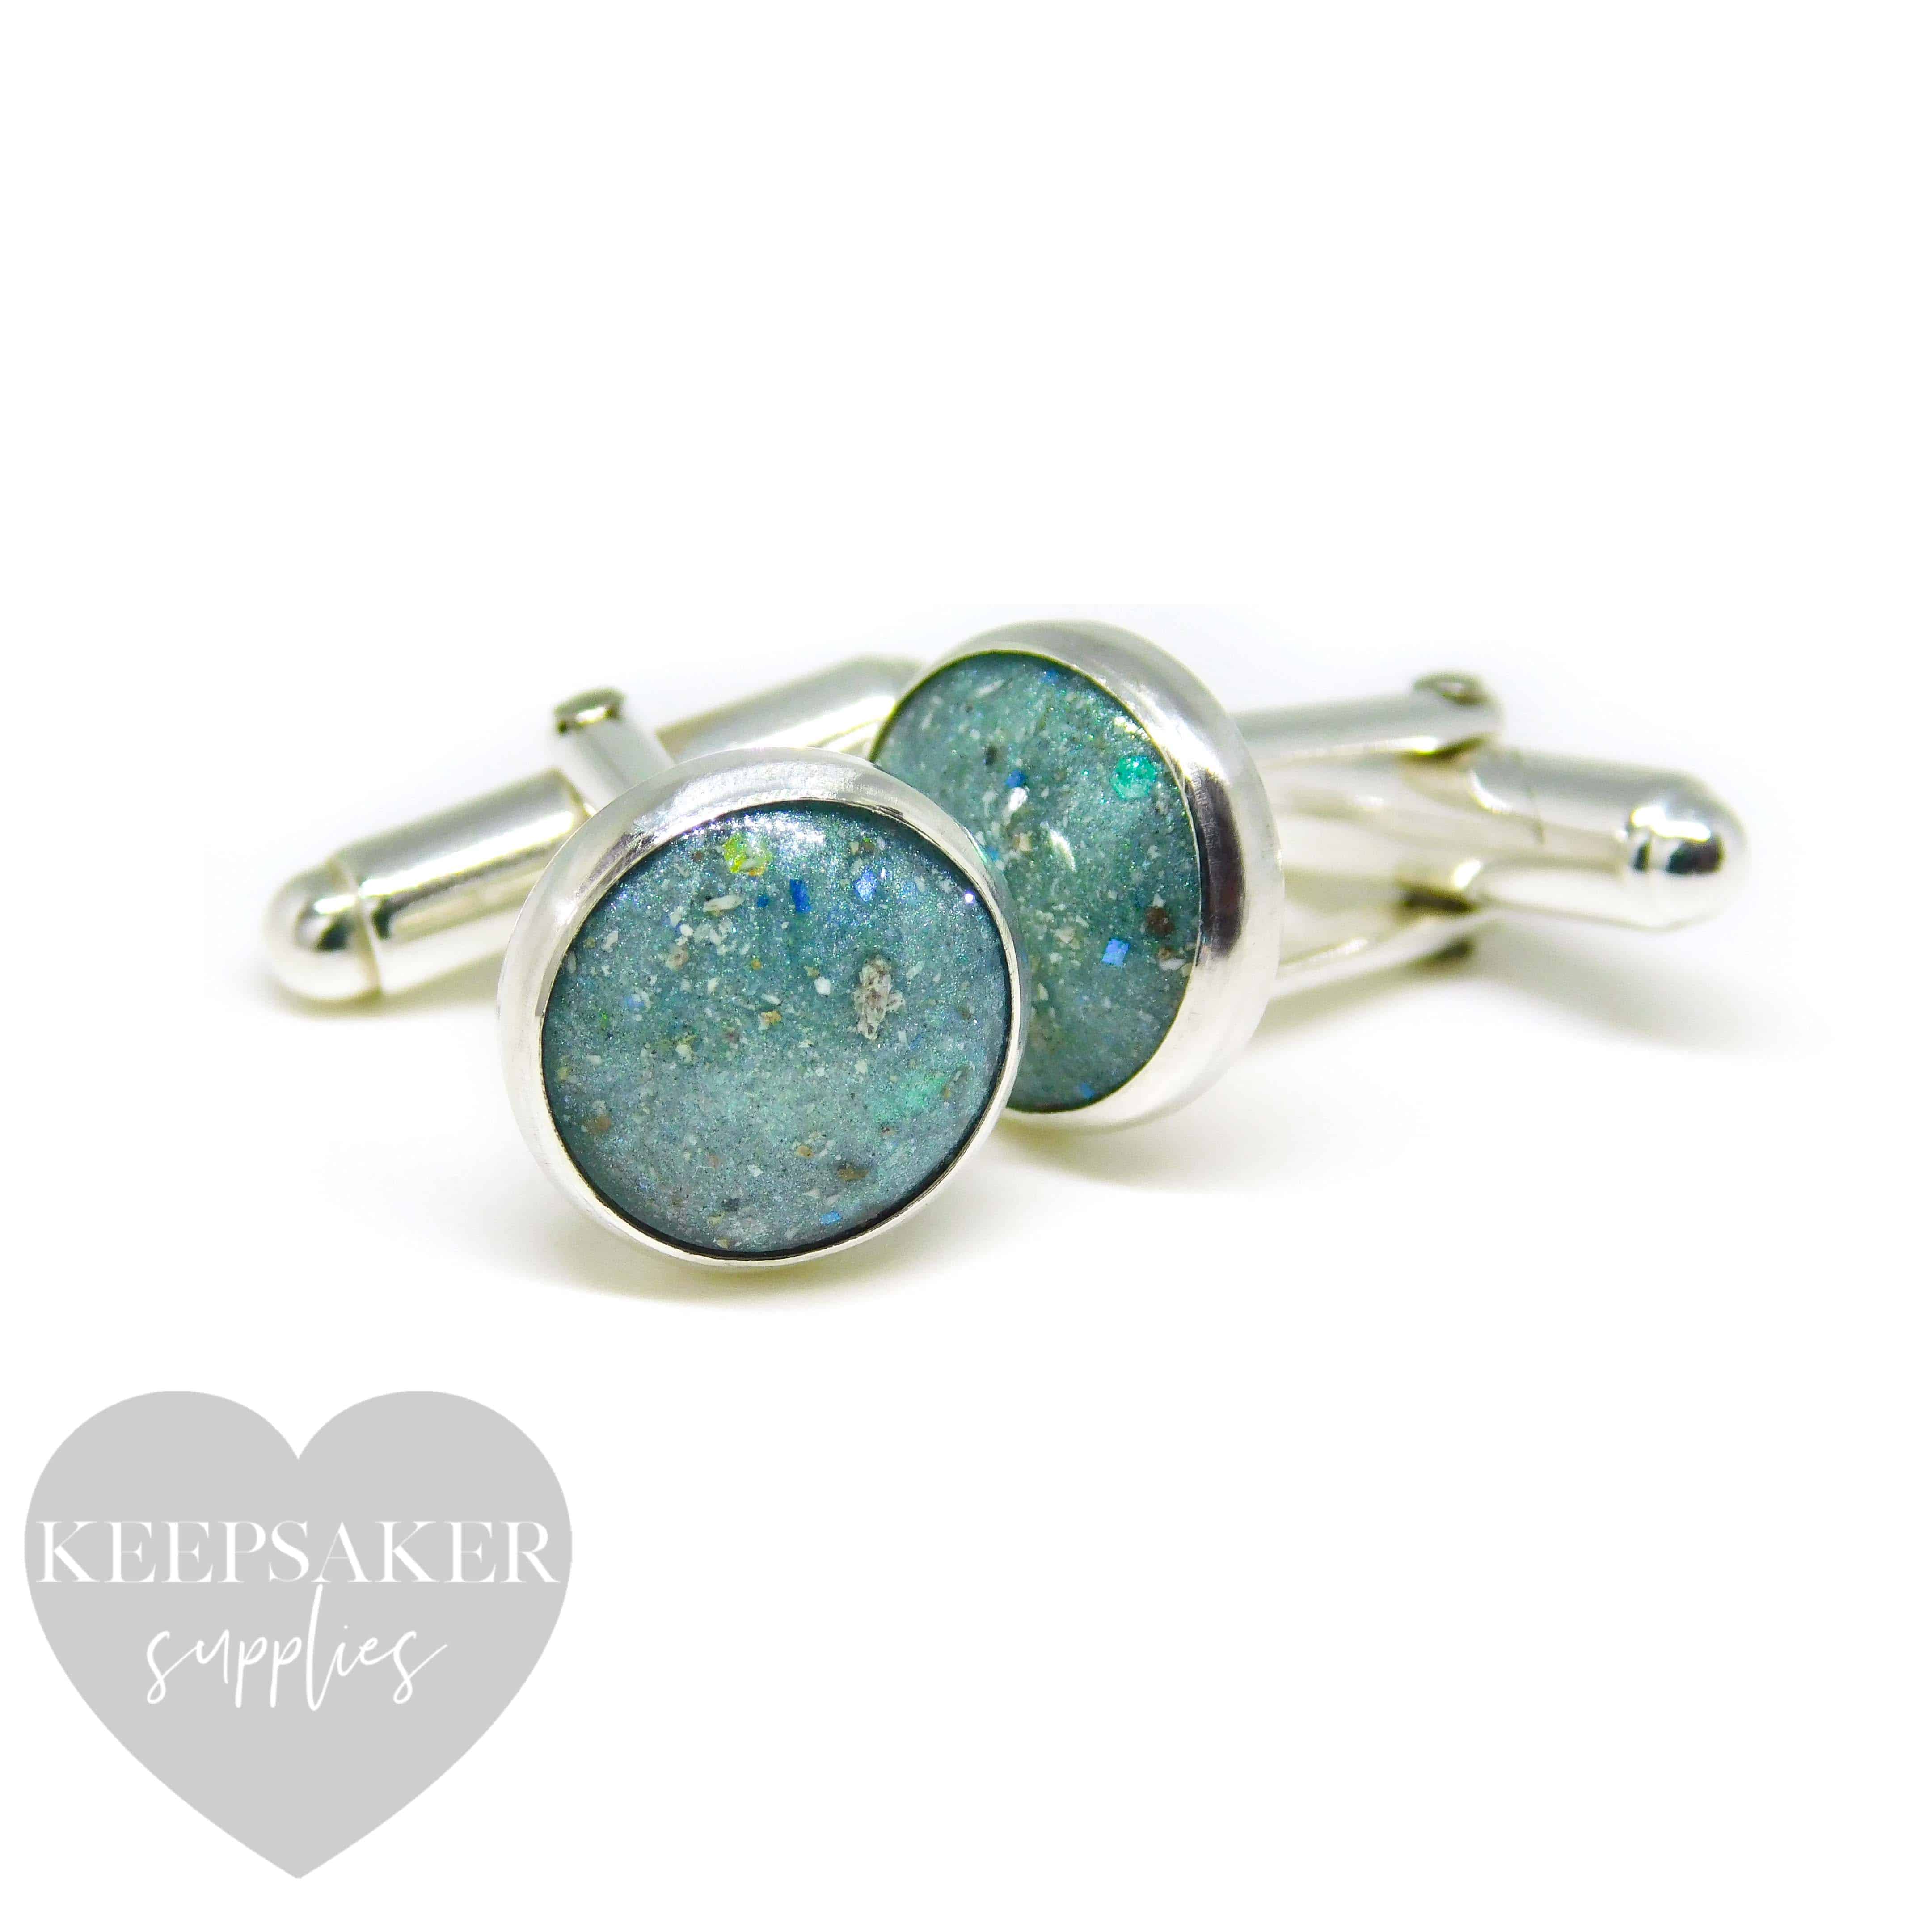 cremation ash cufflinks with mermaid teal resin sparkle mix. Handmade 12mm cabochon rubover bezel set cufflinks in solid sterling silver with cremation ashes